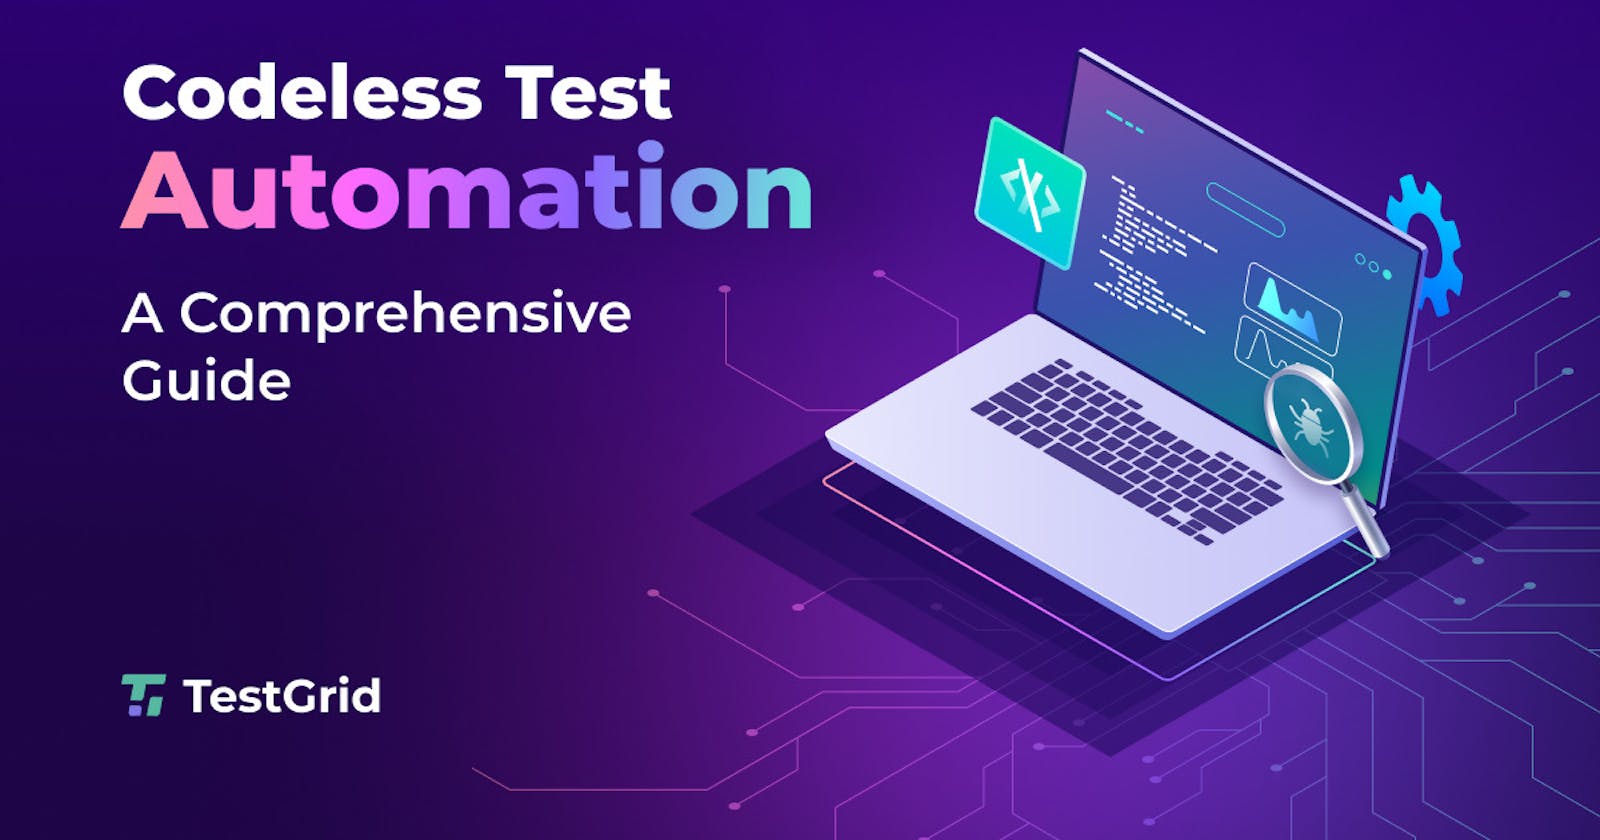 Codeless test automation: A Comprehensive Guide